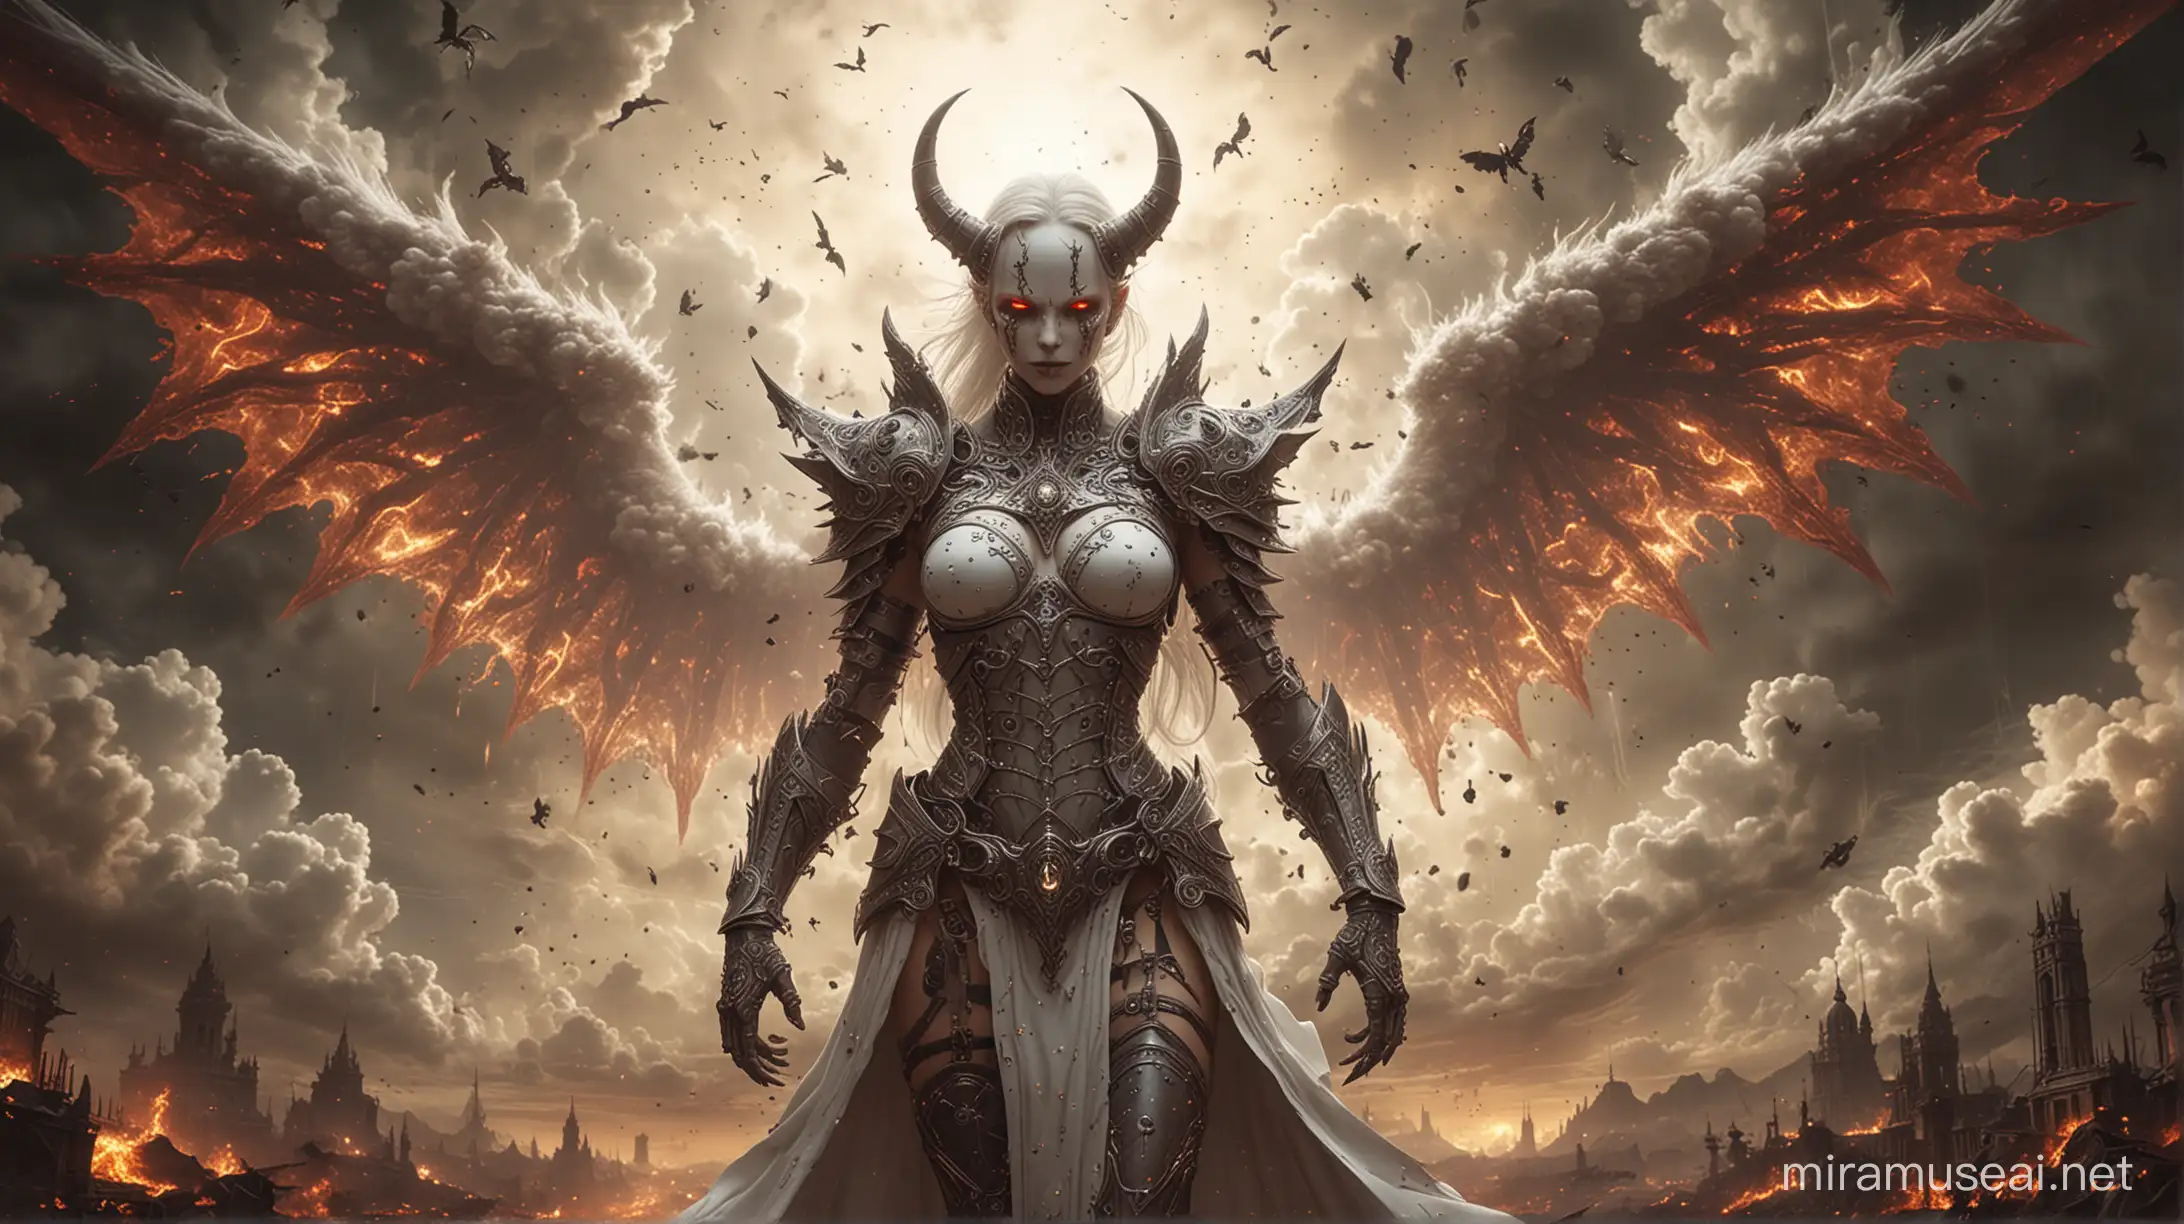 devil angel of doom, white intense glowing eyes, grim armor, chaos anorexia, cluster fuck, whimsical phobia, luminism ash, fractal clouds cursed background, warm tone, (detailed:1.4), best quality, H!D